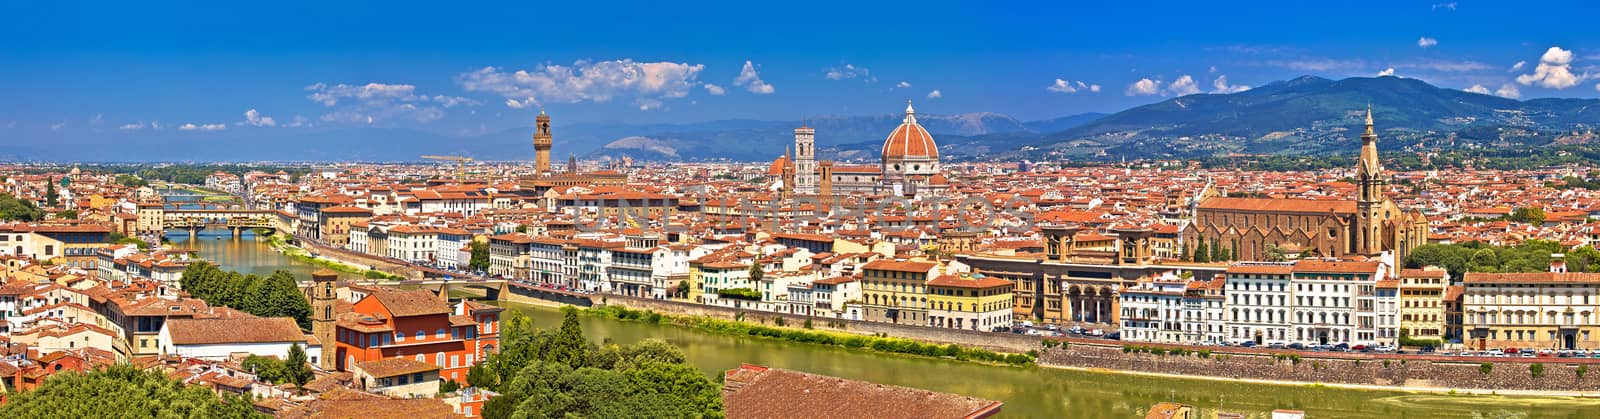 City of Florence aerial historic center panoramic view, Tuscany region of Italy